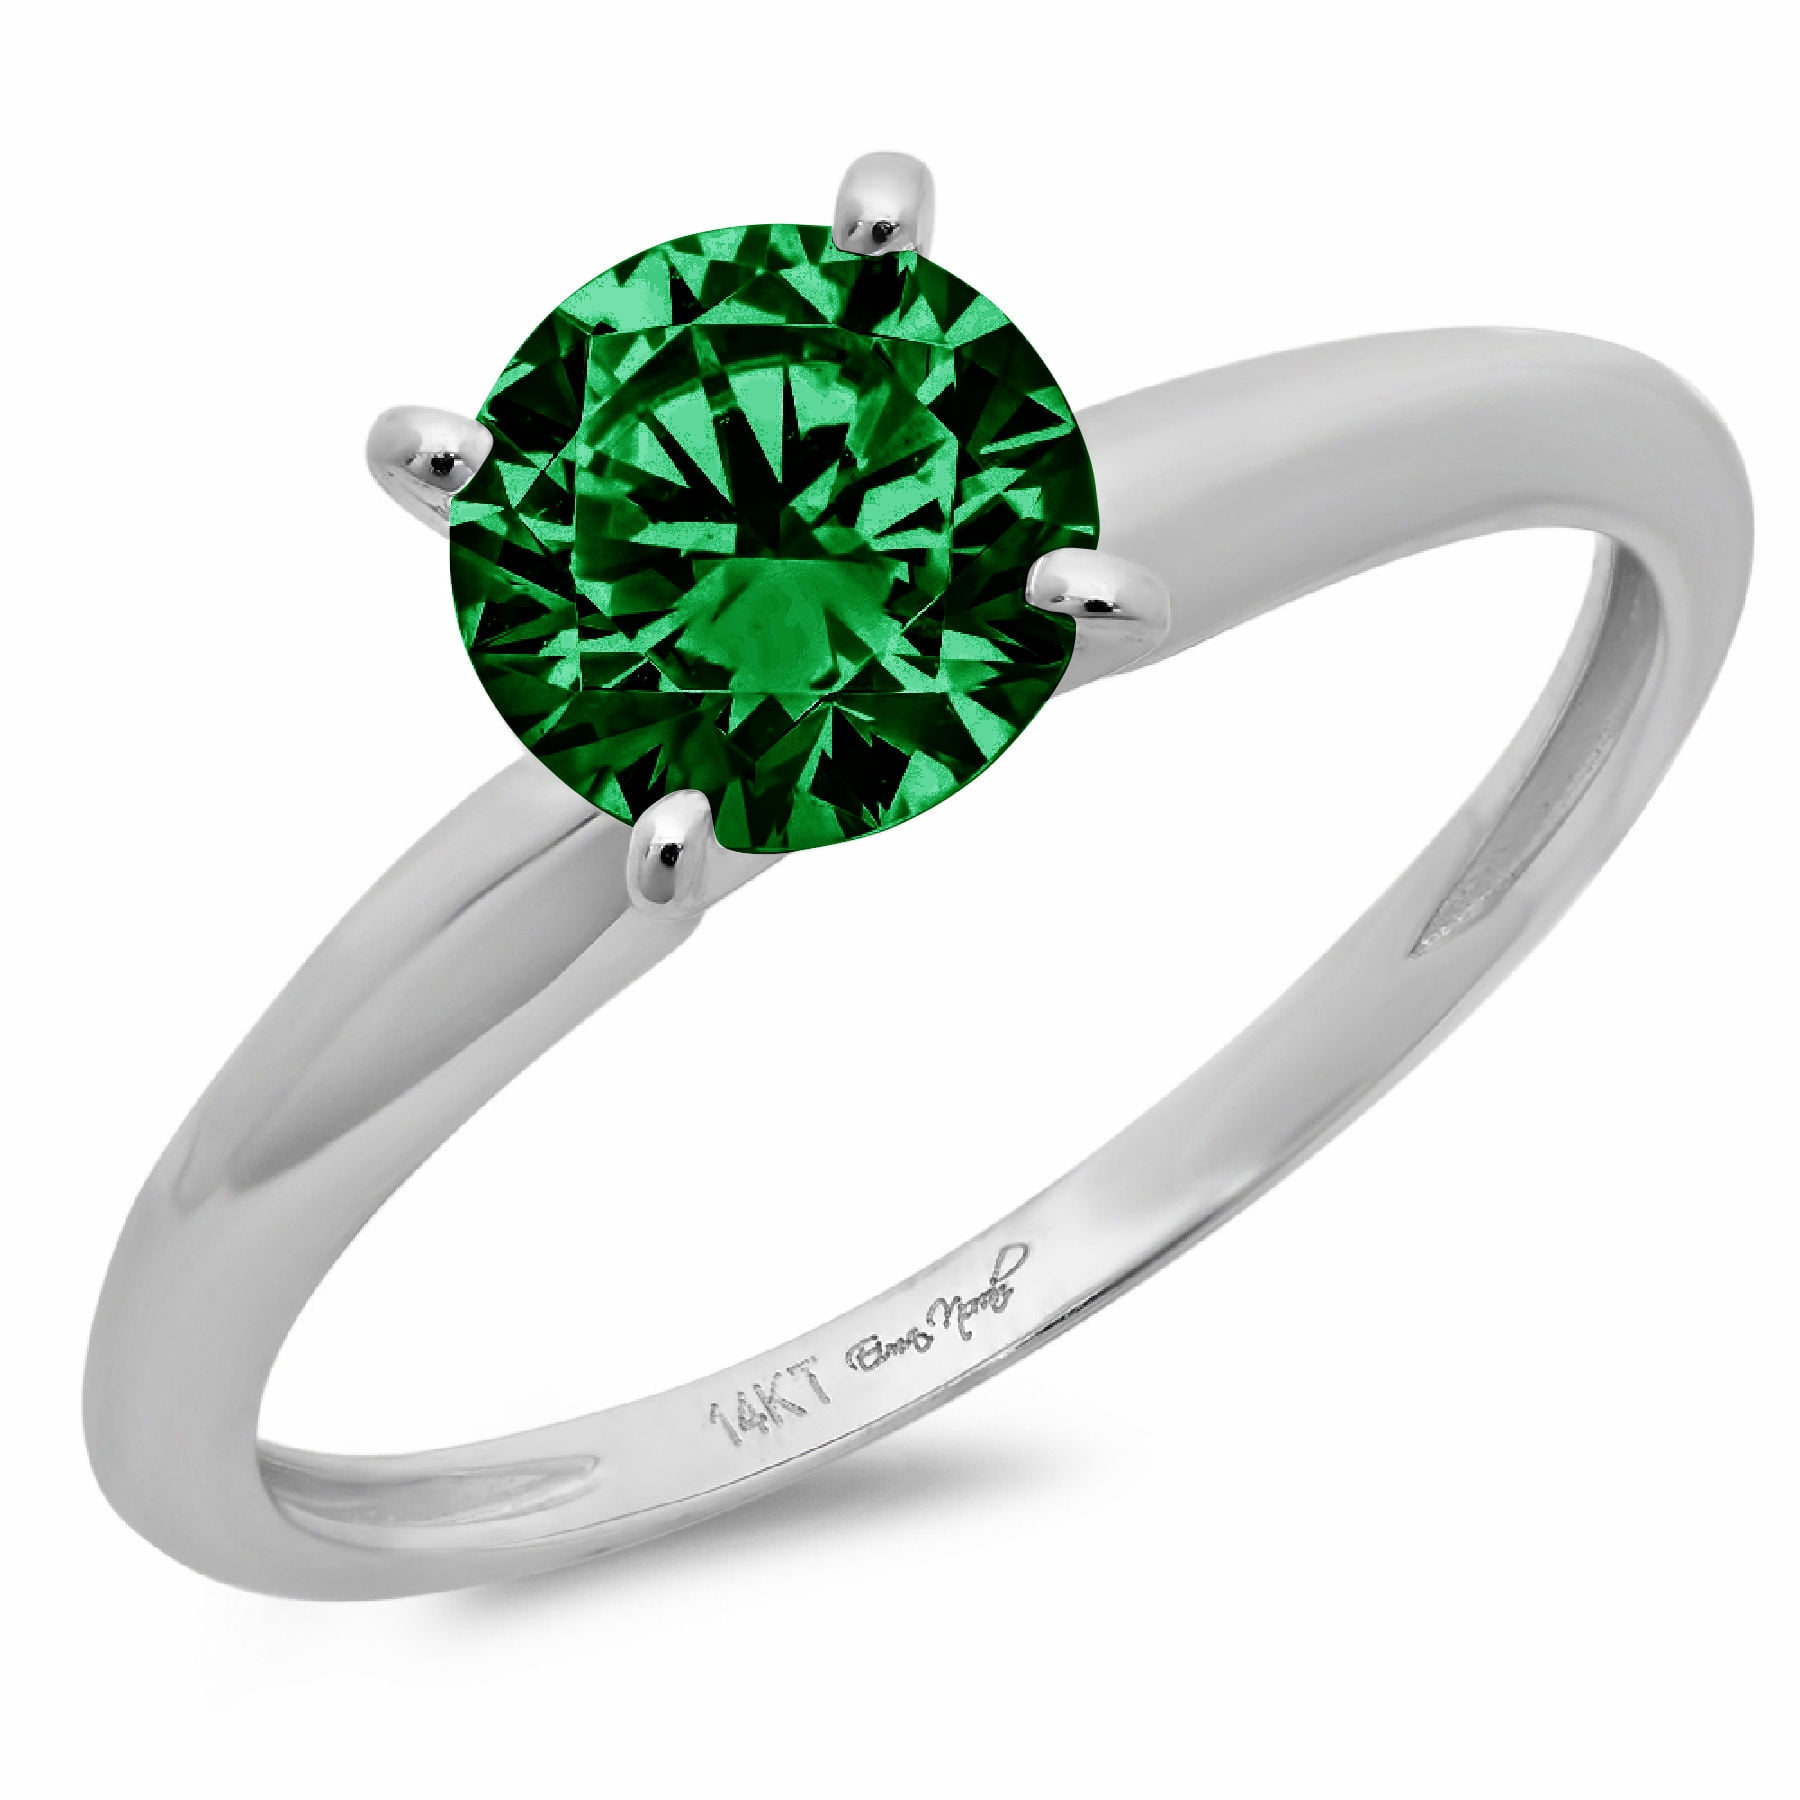 SVC-JEWELS 14K White Gold Over 925 Sterling Silver Round Cut Green Tourmaline Criss Cross X Wedding Band Ring Men 